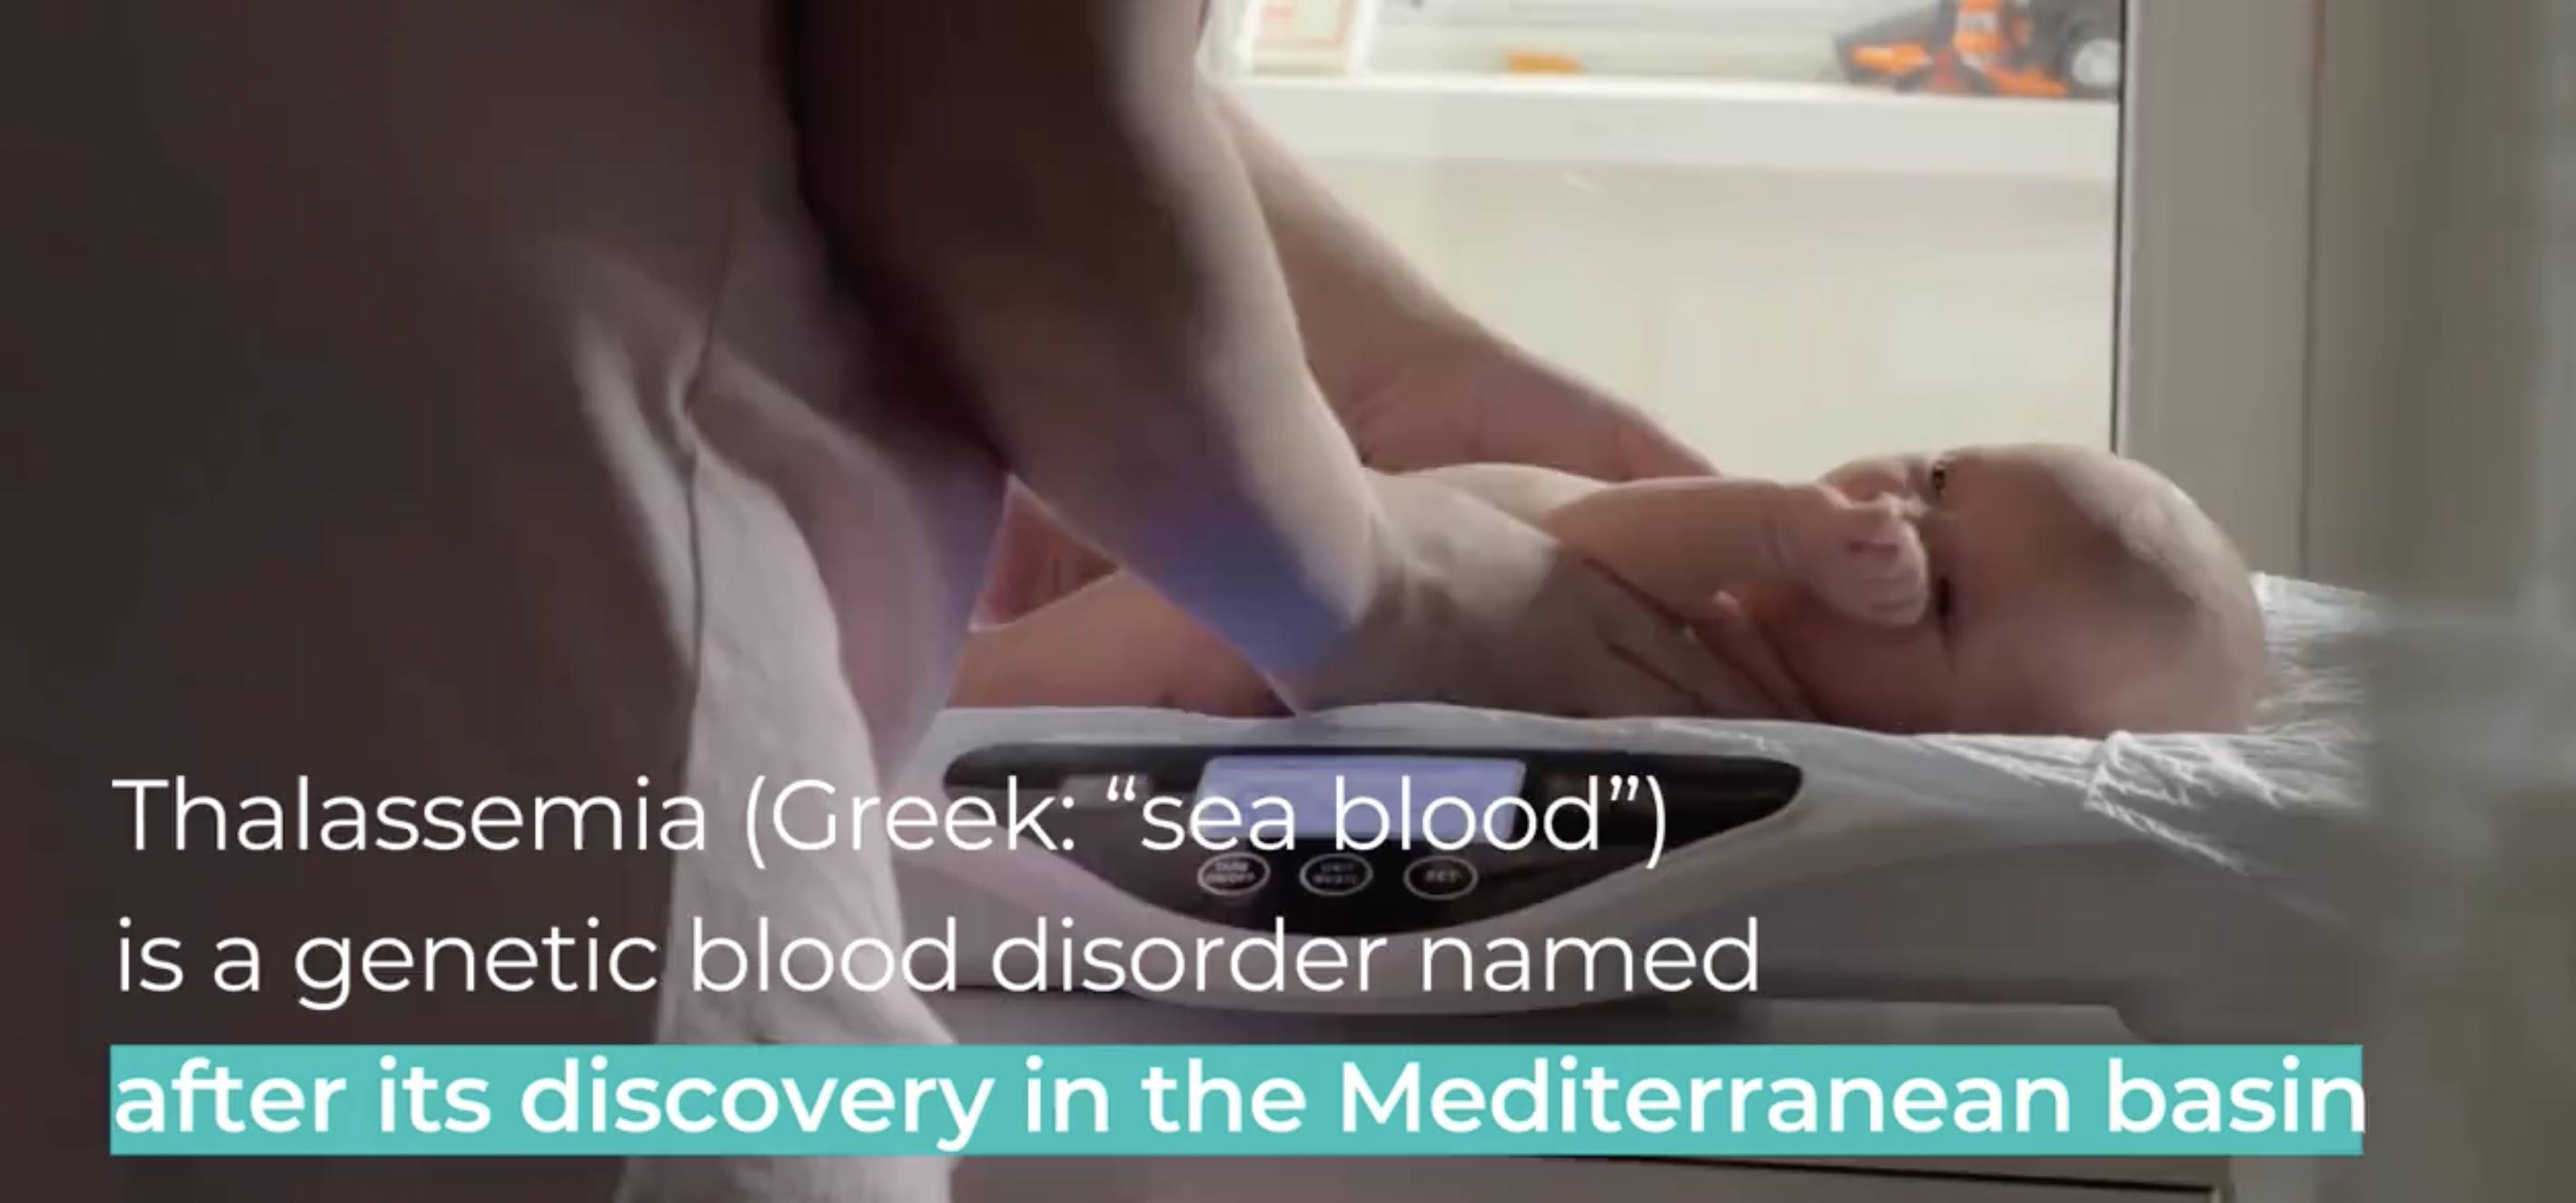 Thalassemia is a genetic blood disorder named after its discovery in the Mediterranean basin. 